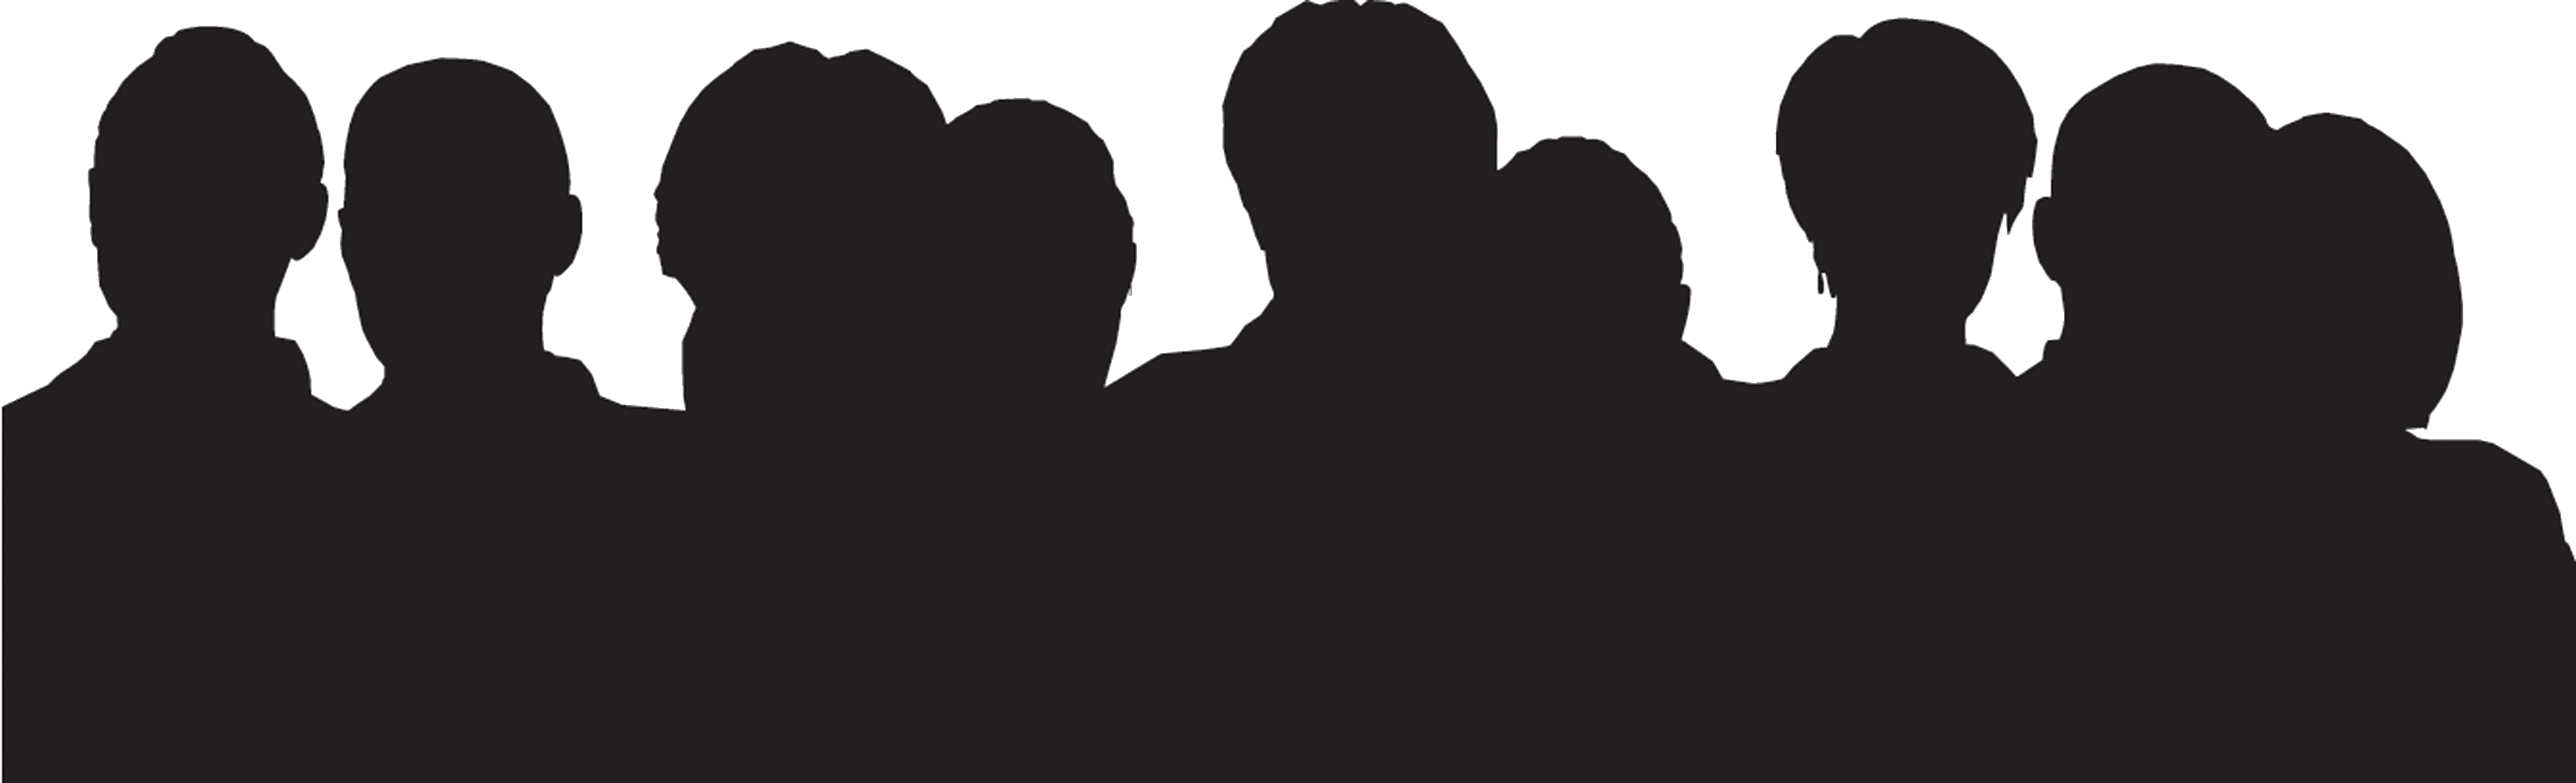 28 Collection Of Crowd Of People Clipart Png - Crowd Silhouette (3290x1000)